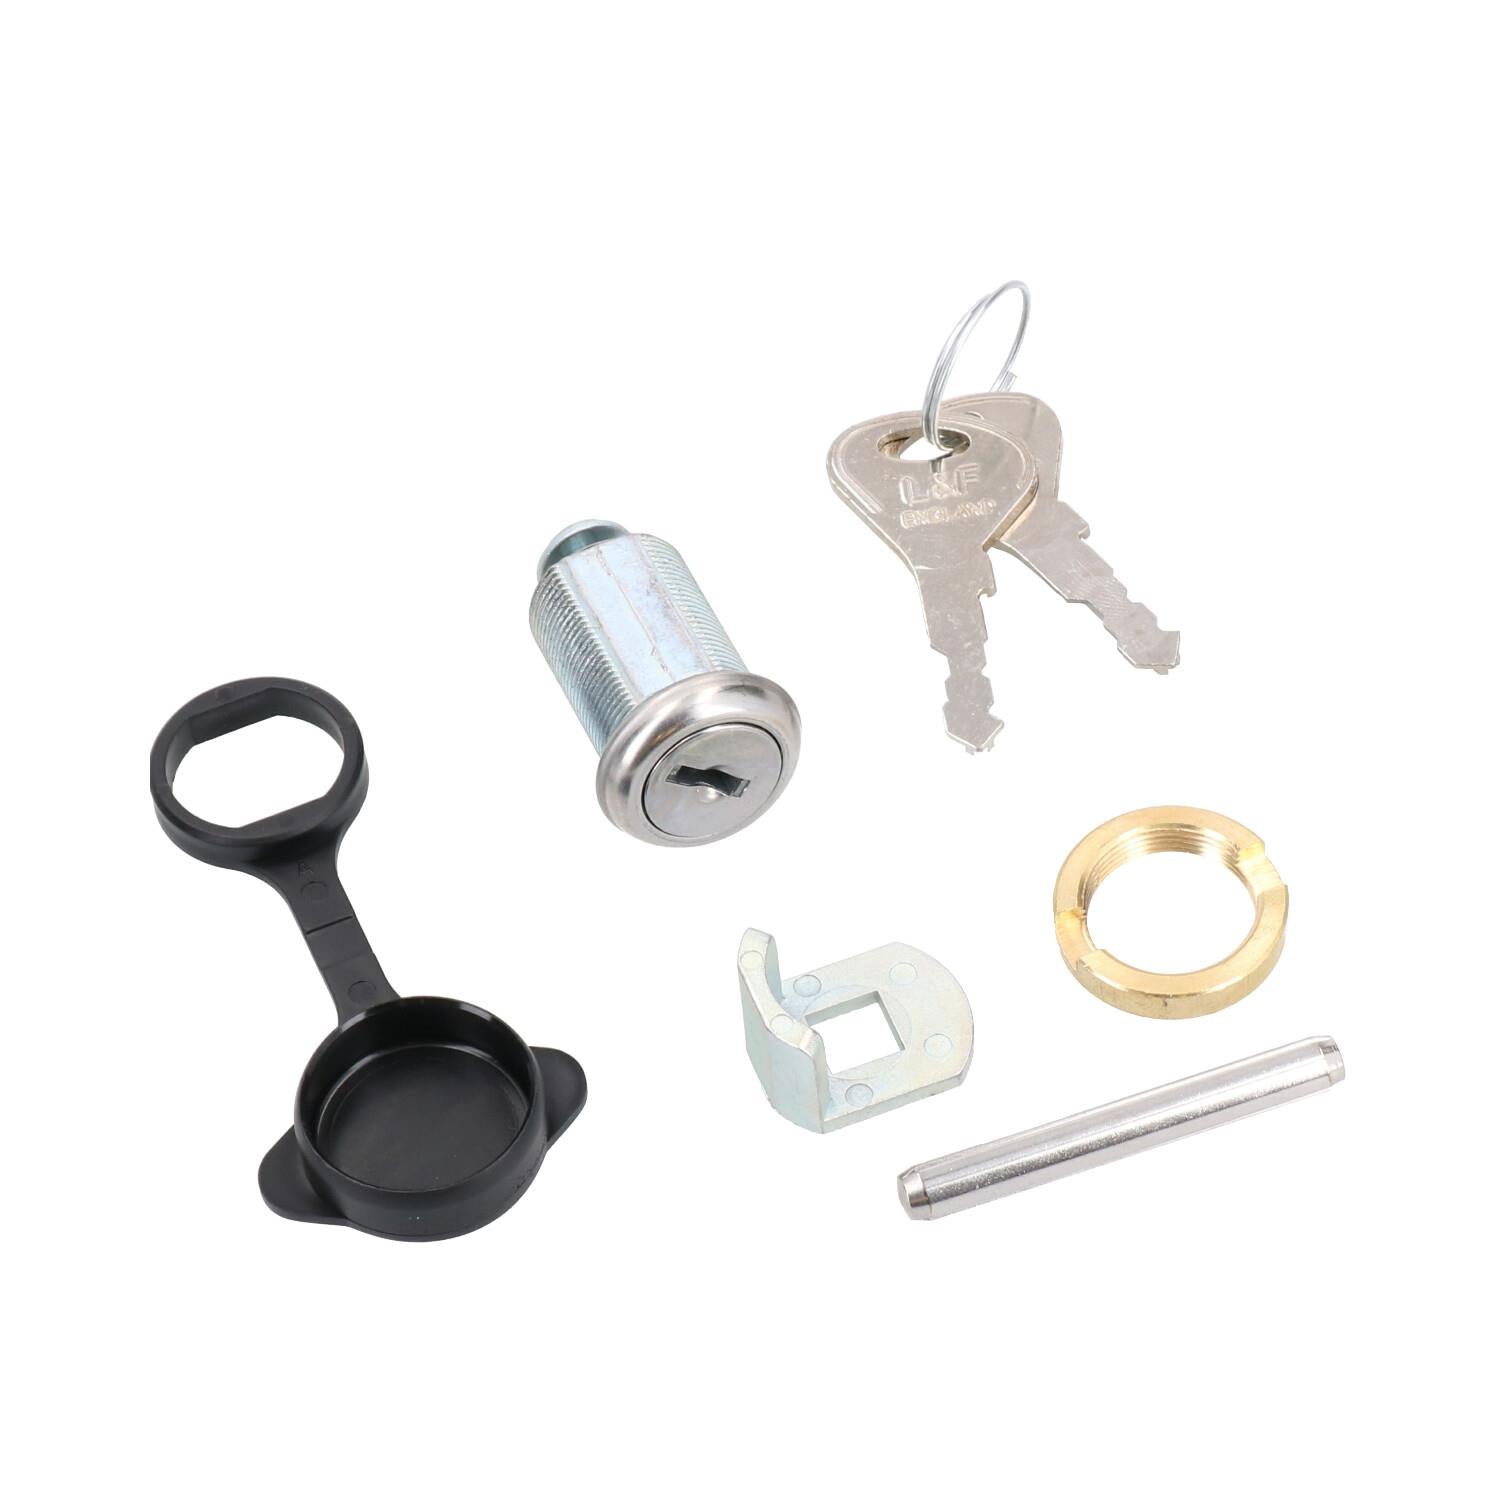 Genuine Knott Replacement Hitch Lock Kit for Ifor Williams Trailers Coupling 2 Keys